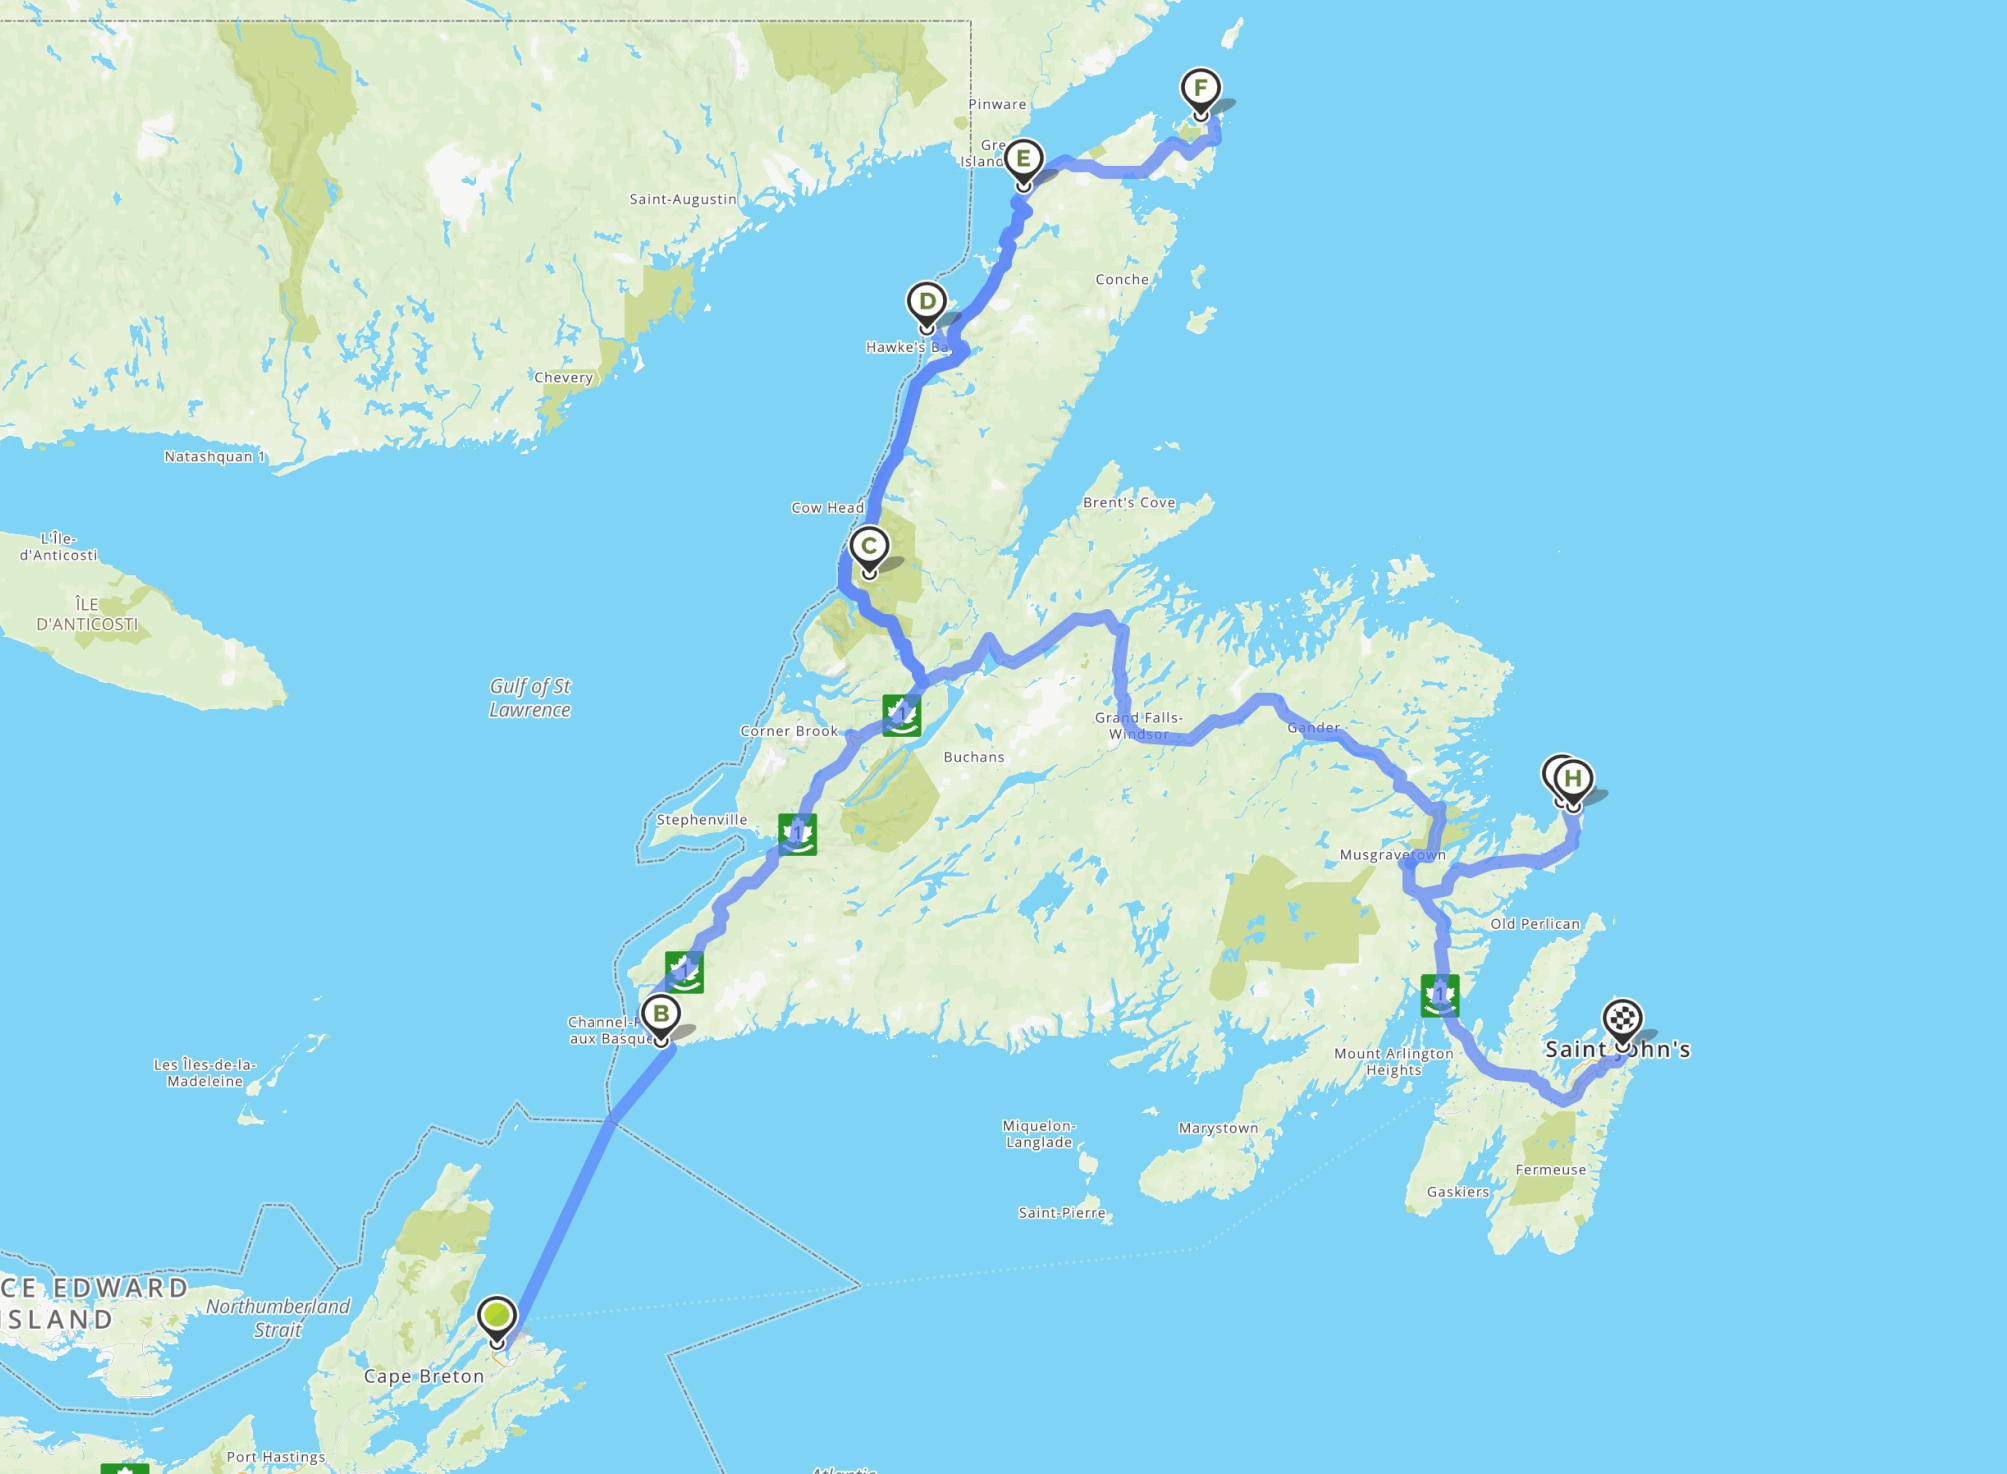 Map showing route of a Newfoundland roadtrip from Port aux Basques to St. John’s with stops in between